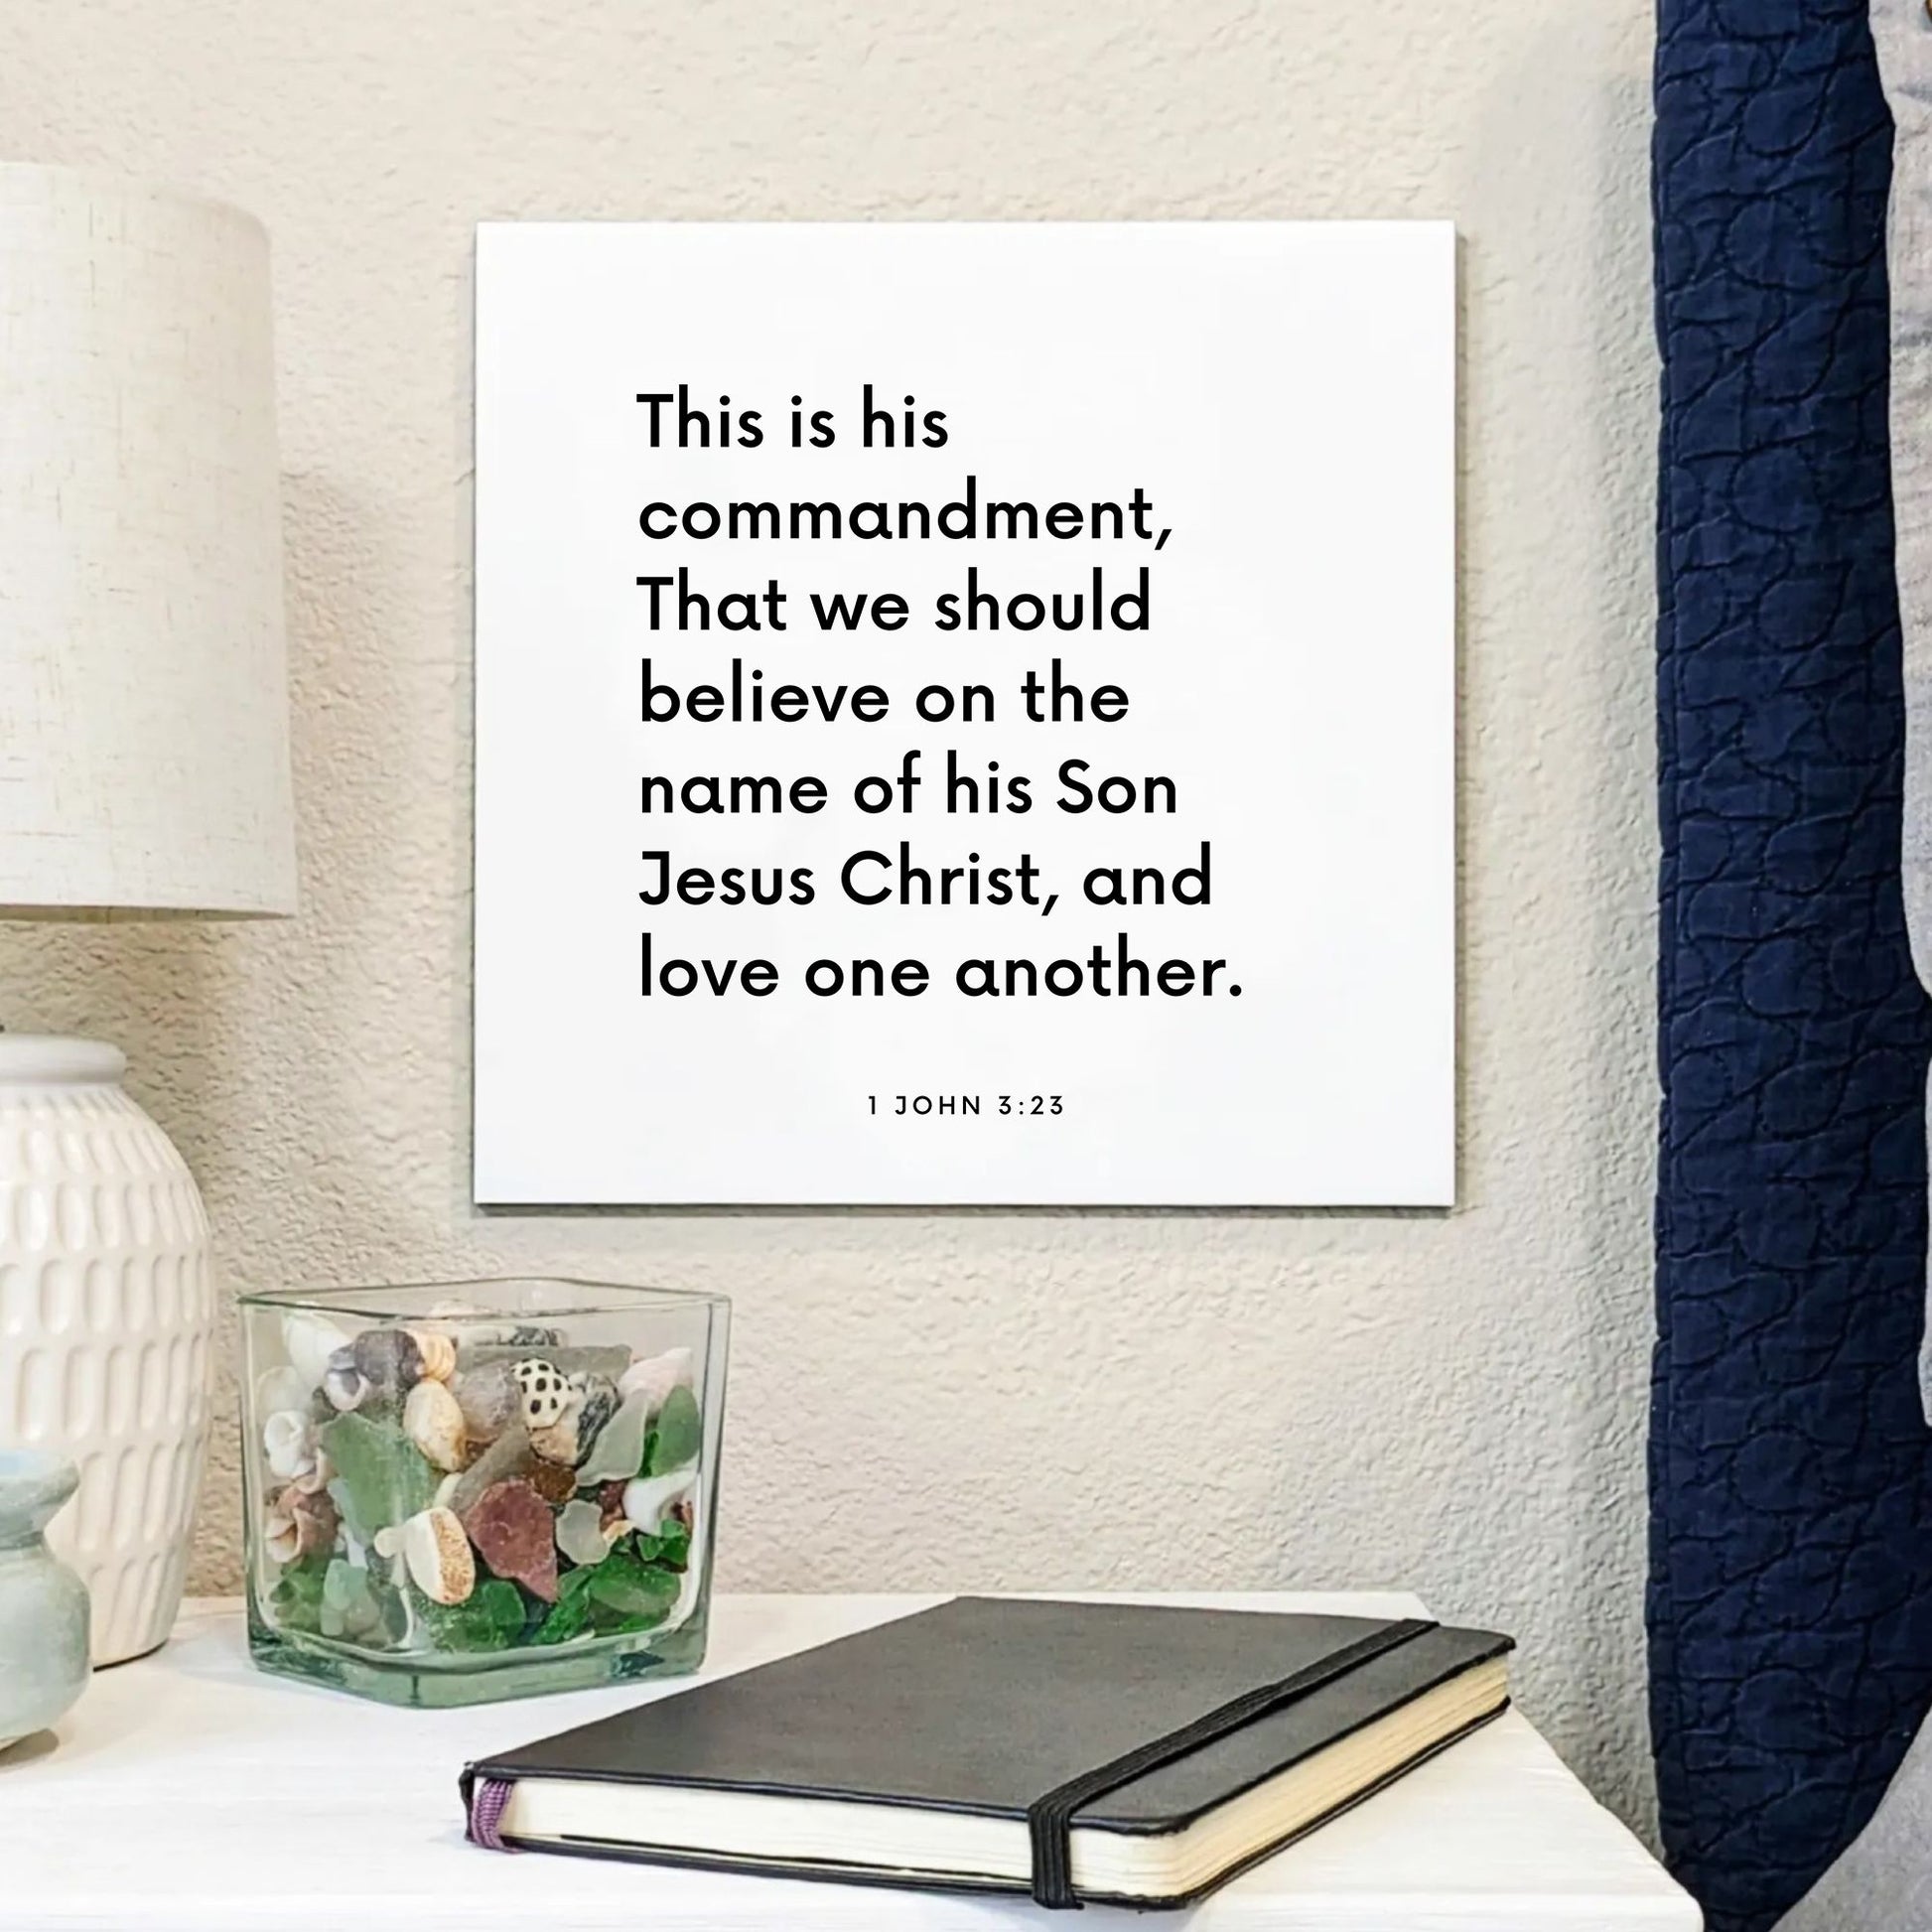 Bedside mouting of the scripture tile for 1 John 3:23 - "We should believe on the name of his Son"